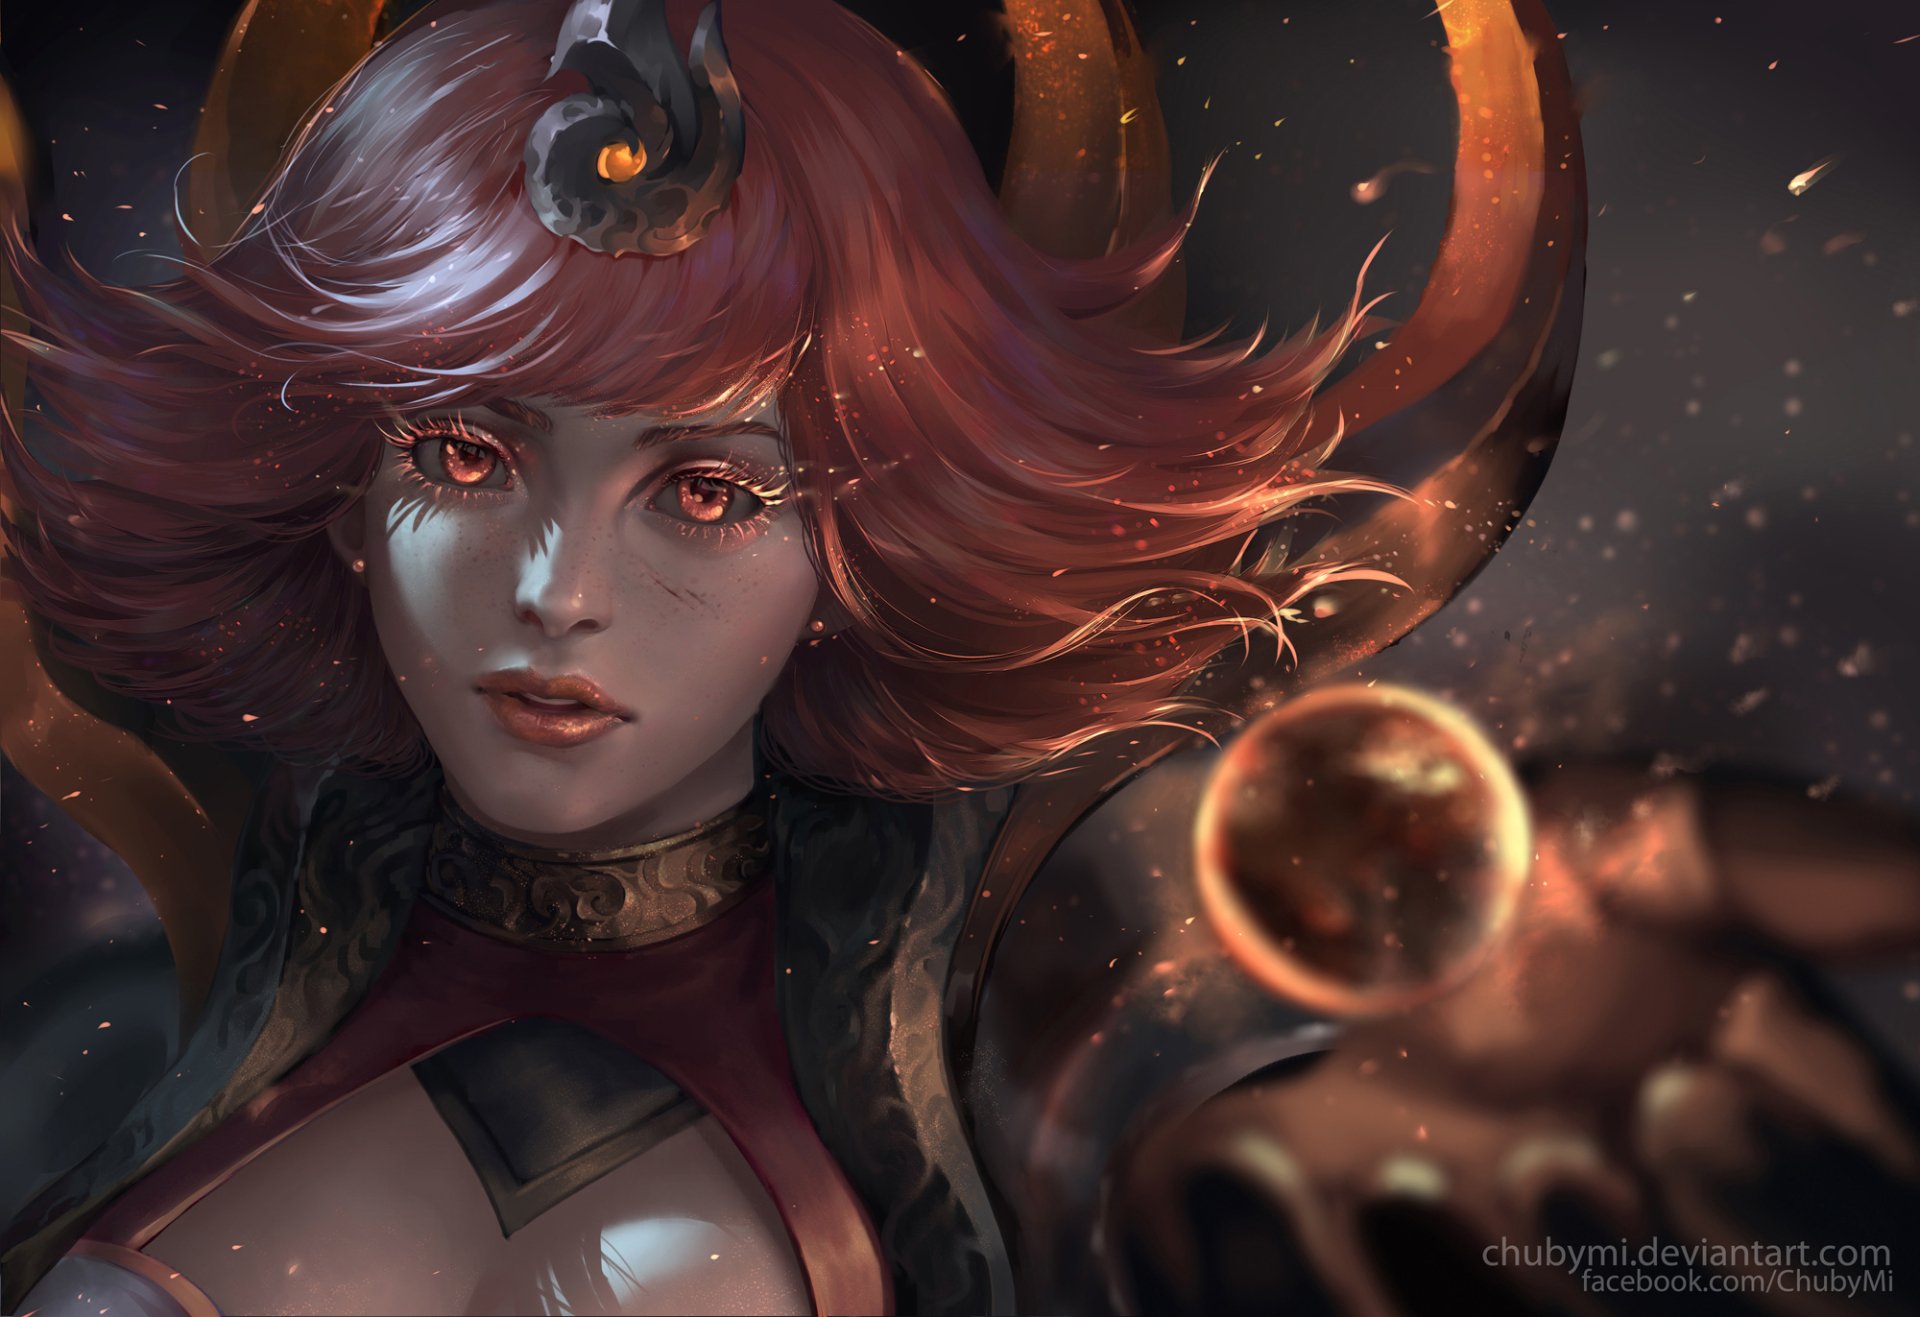 Download Lux League Of Legends Video Game League Of Legends Hd Wallpaper By Chuby Mi